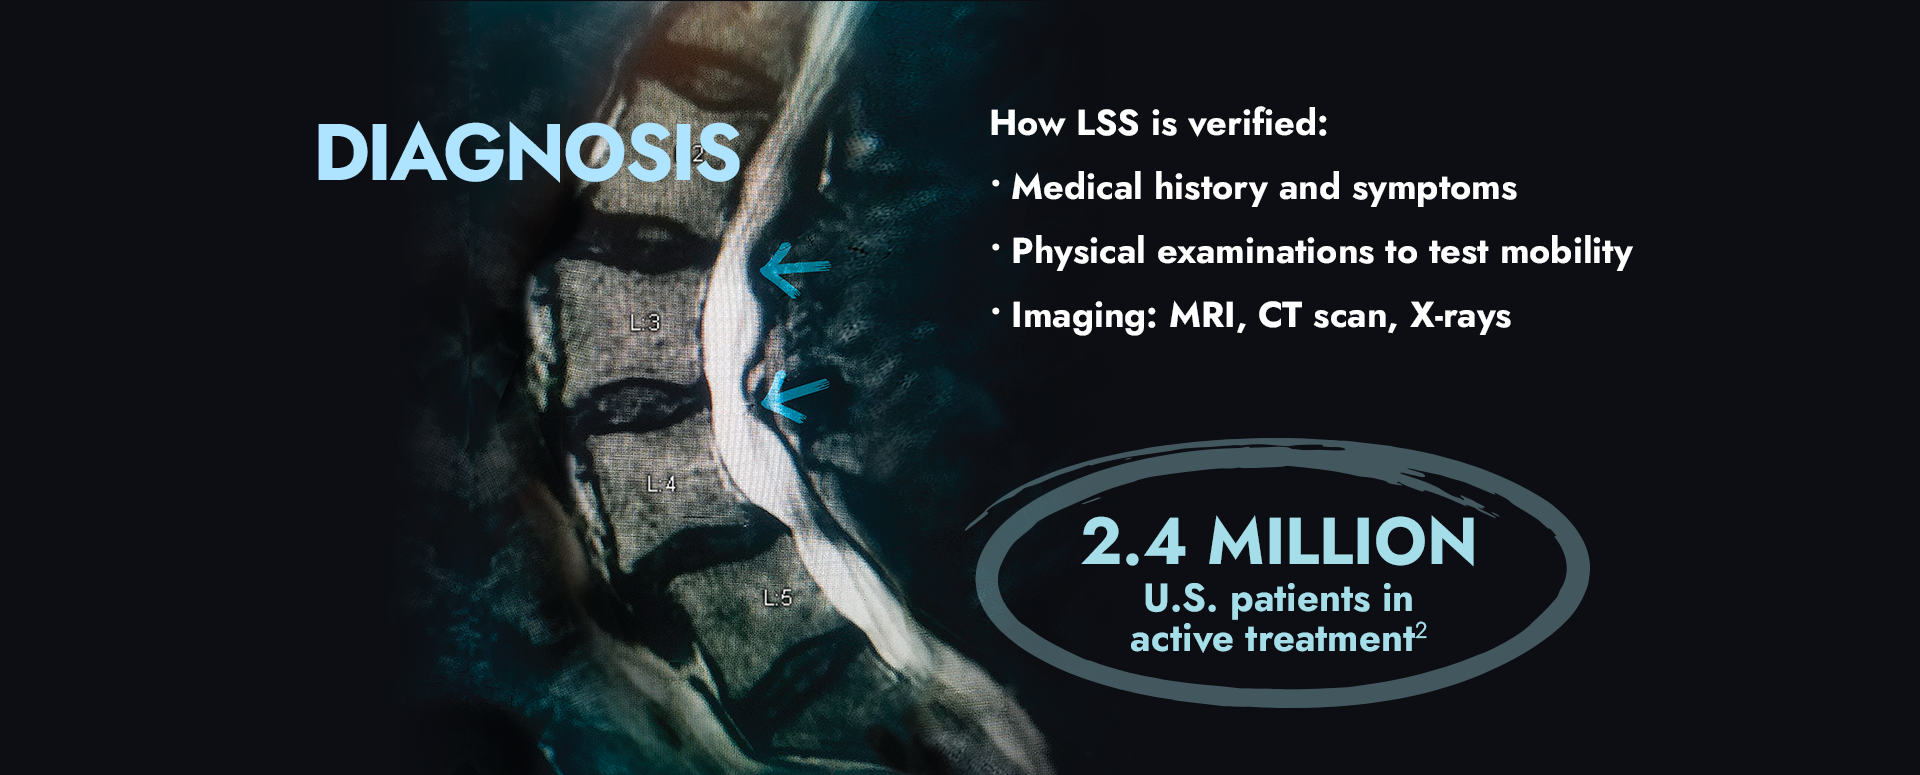 Diagnosis: How LSS is verified: Medical history and symptoms, physical examinations to test mobility, Imaging: MRI, CT scan, X-rays. 2.4 million U.S. patients in active treatment.